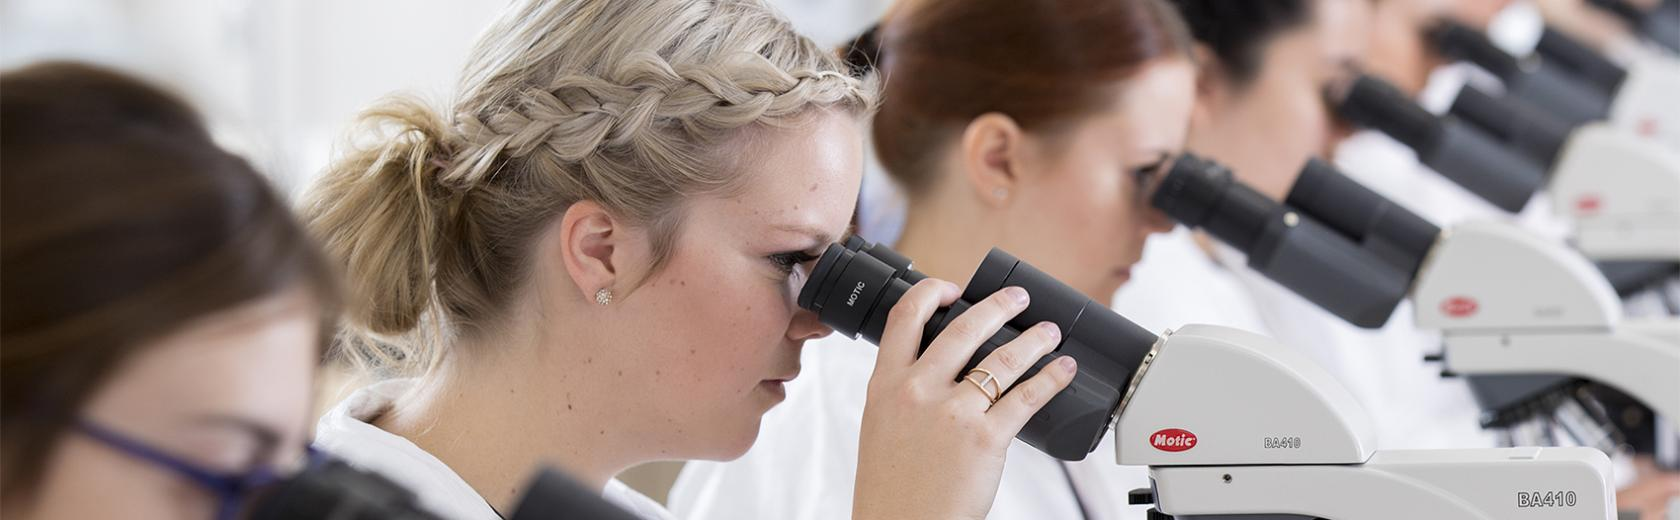 Medical Laboratory Assistant Certificate - students looking in microscropes